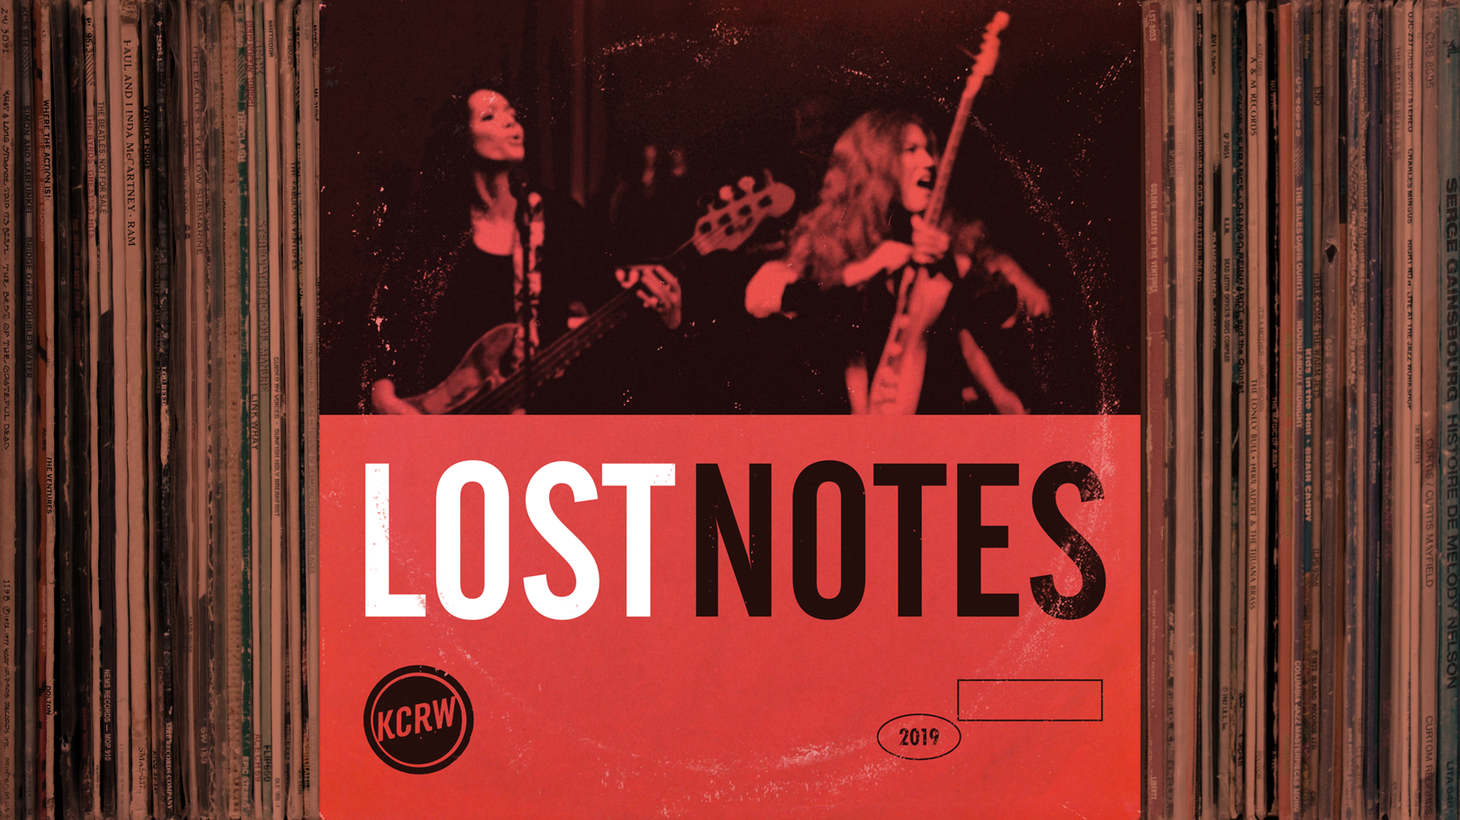 On this season of Lost Notes, the music journalist and author Jessica Hopper is looking at artist legacies. How do they hold up? How do they change over time?